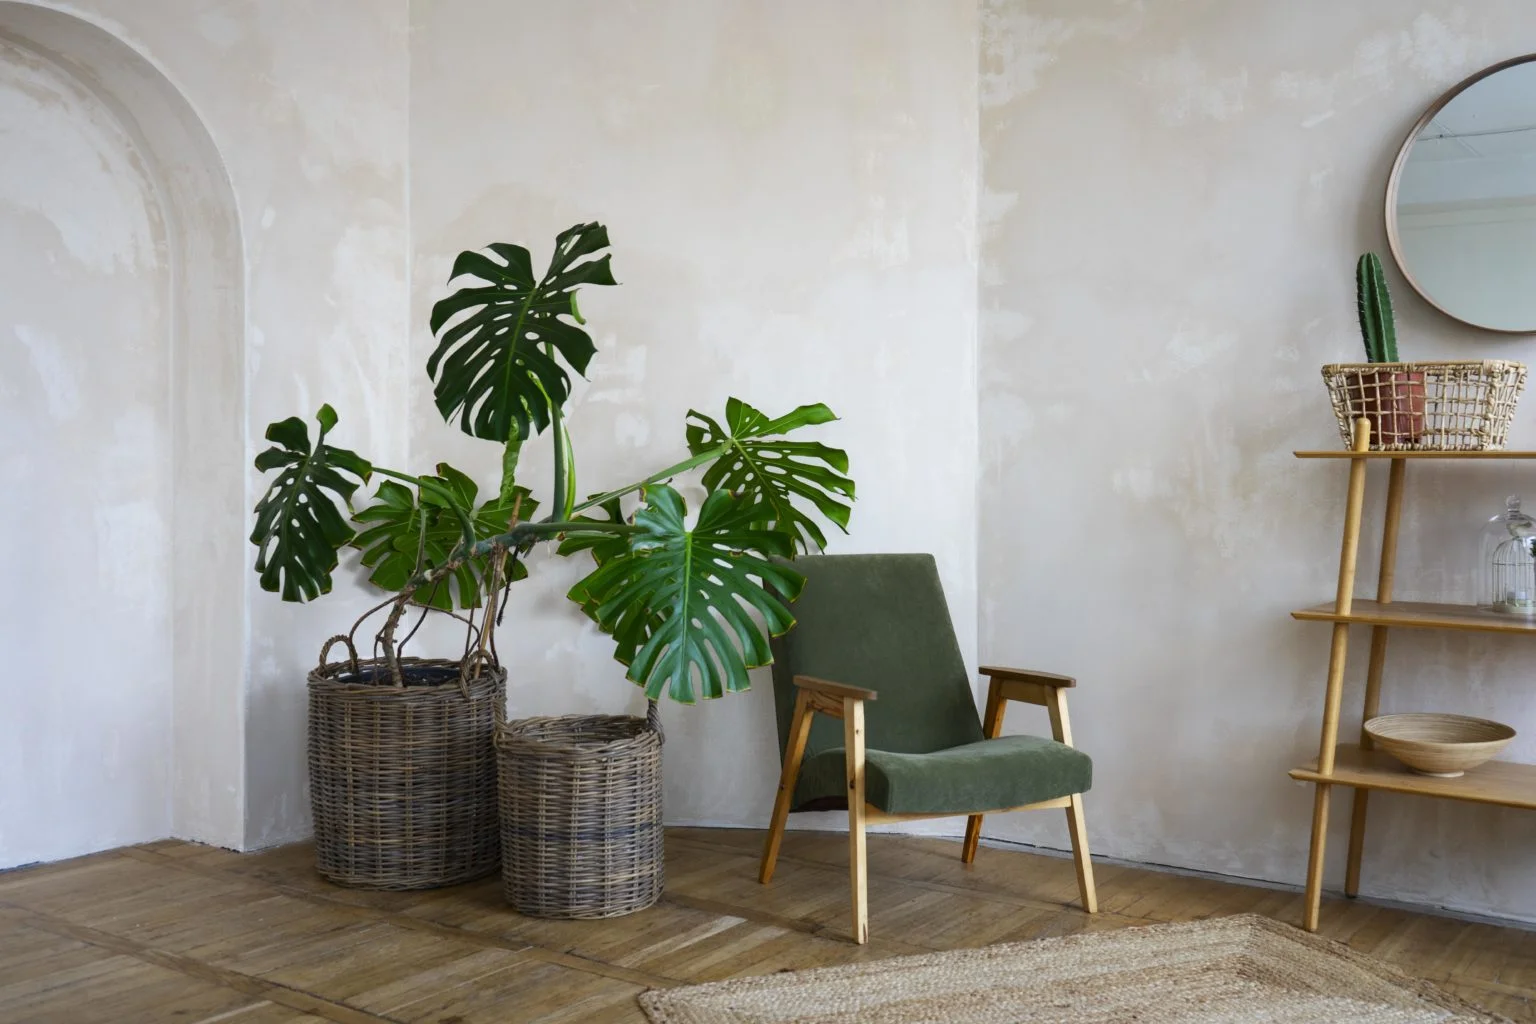 Green Interiors – Creating Spaces that Breathe Life